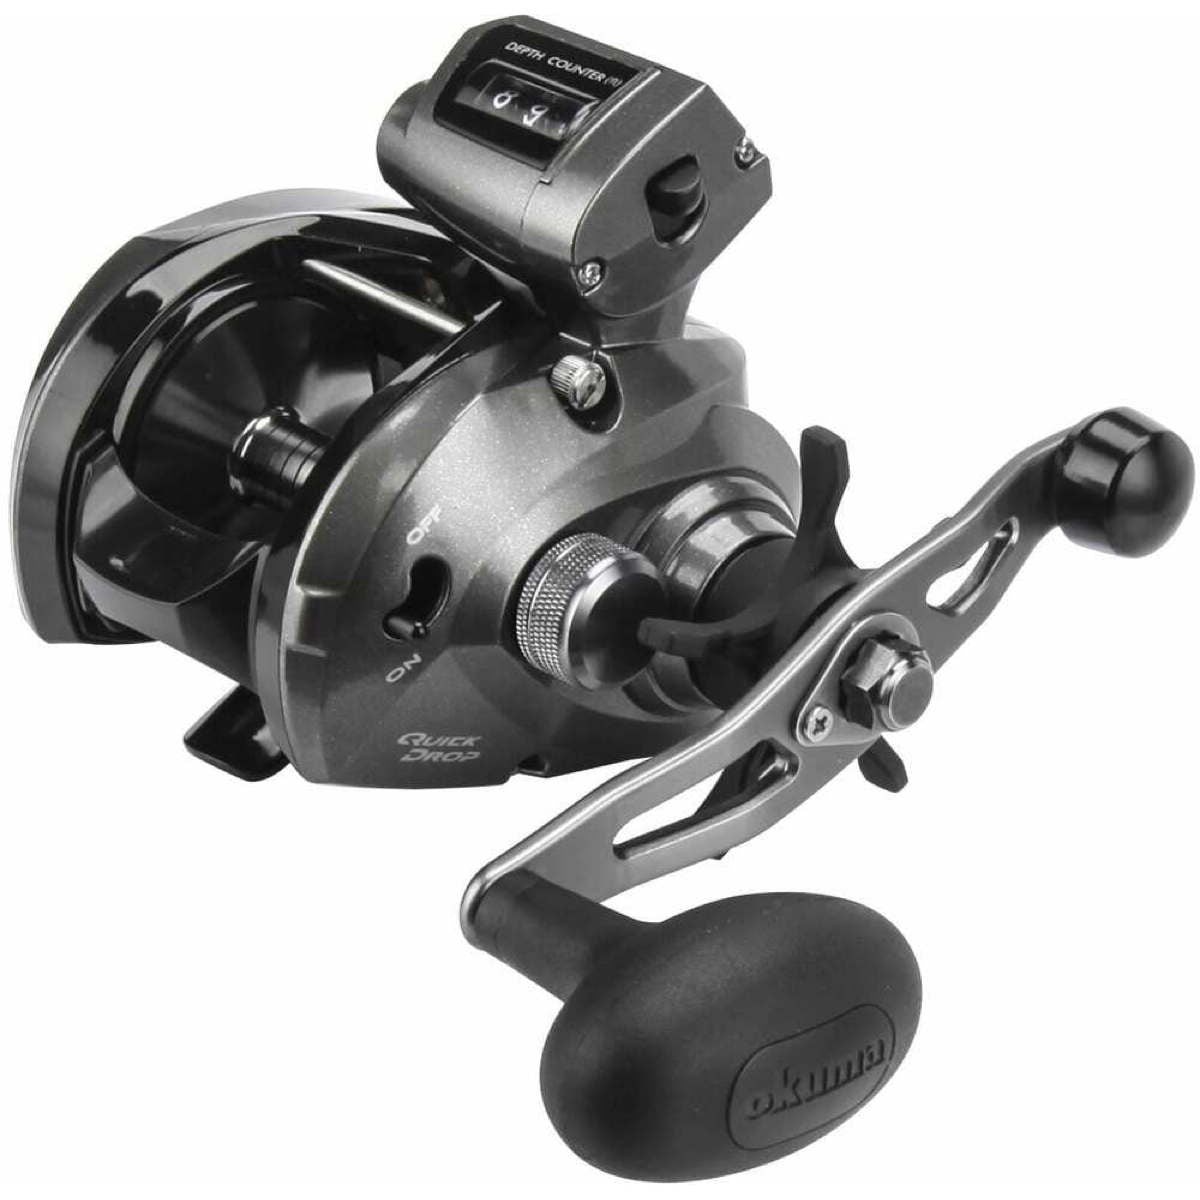 Photo of Okuma Convector Low Profile Line Counter Reel for sale at United Tackle Shops.